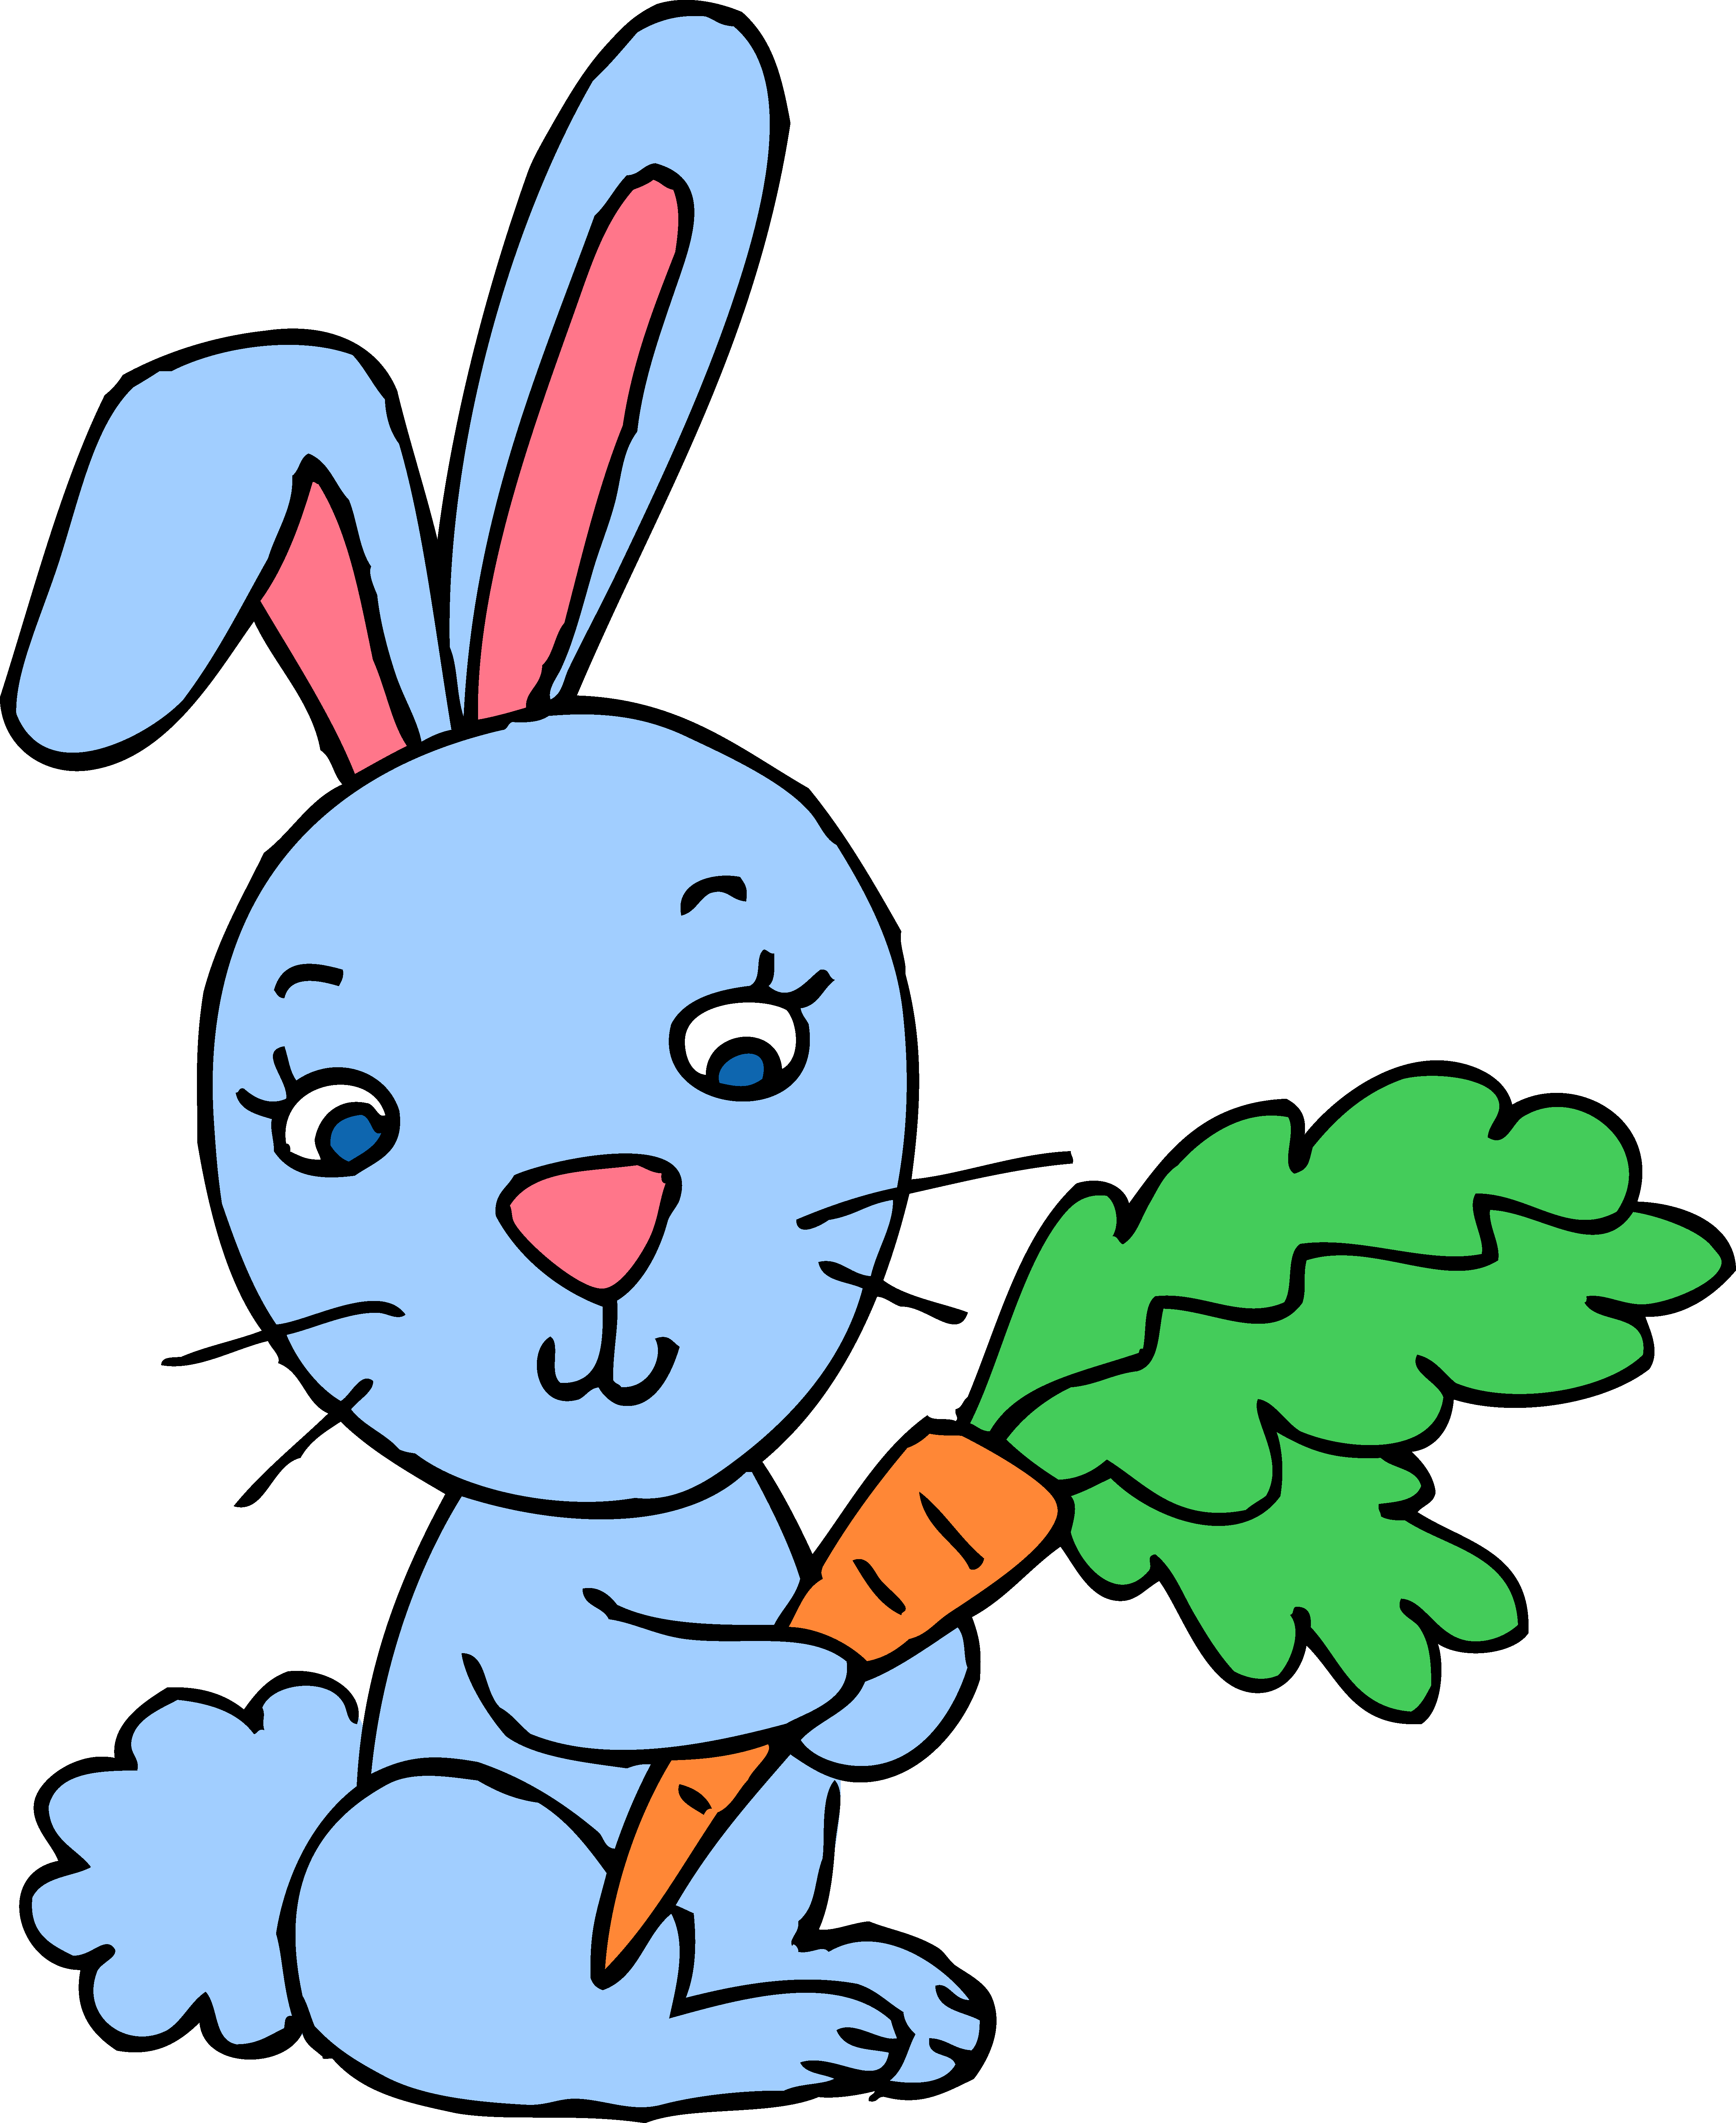 Easter at getdrawings com. Winter clipart bunny